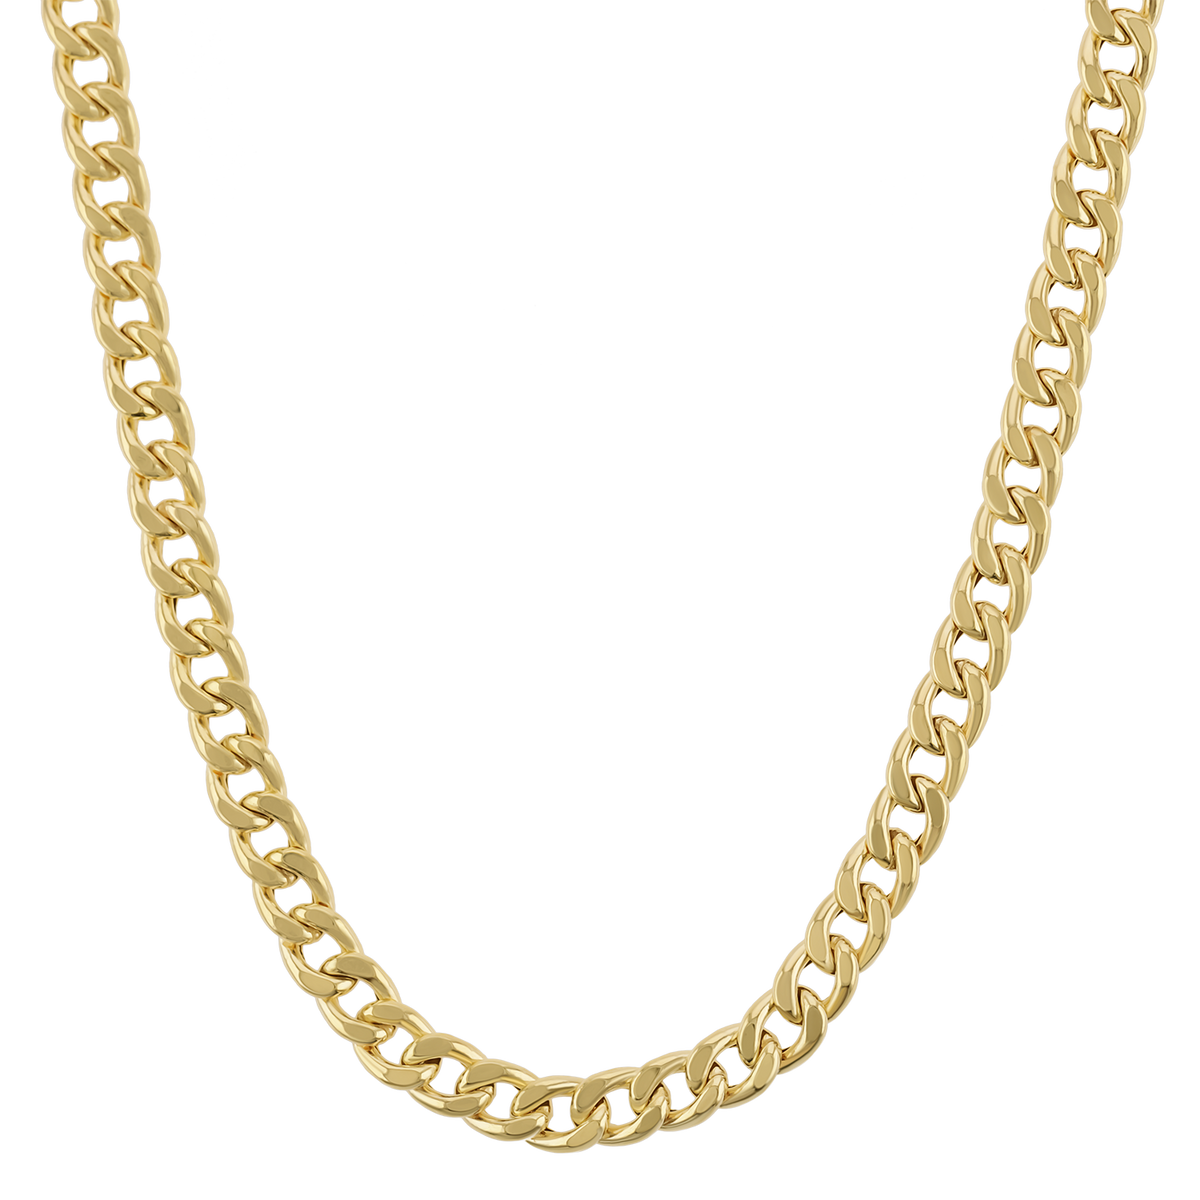 9mm Miami Cuban Link Chain Necklace 14K Yellow Gold / 24 Inches by Baby Gold - Shop Custom Gold Jewelry